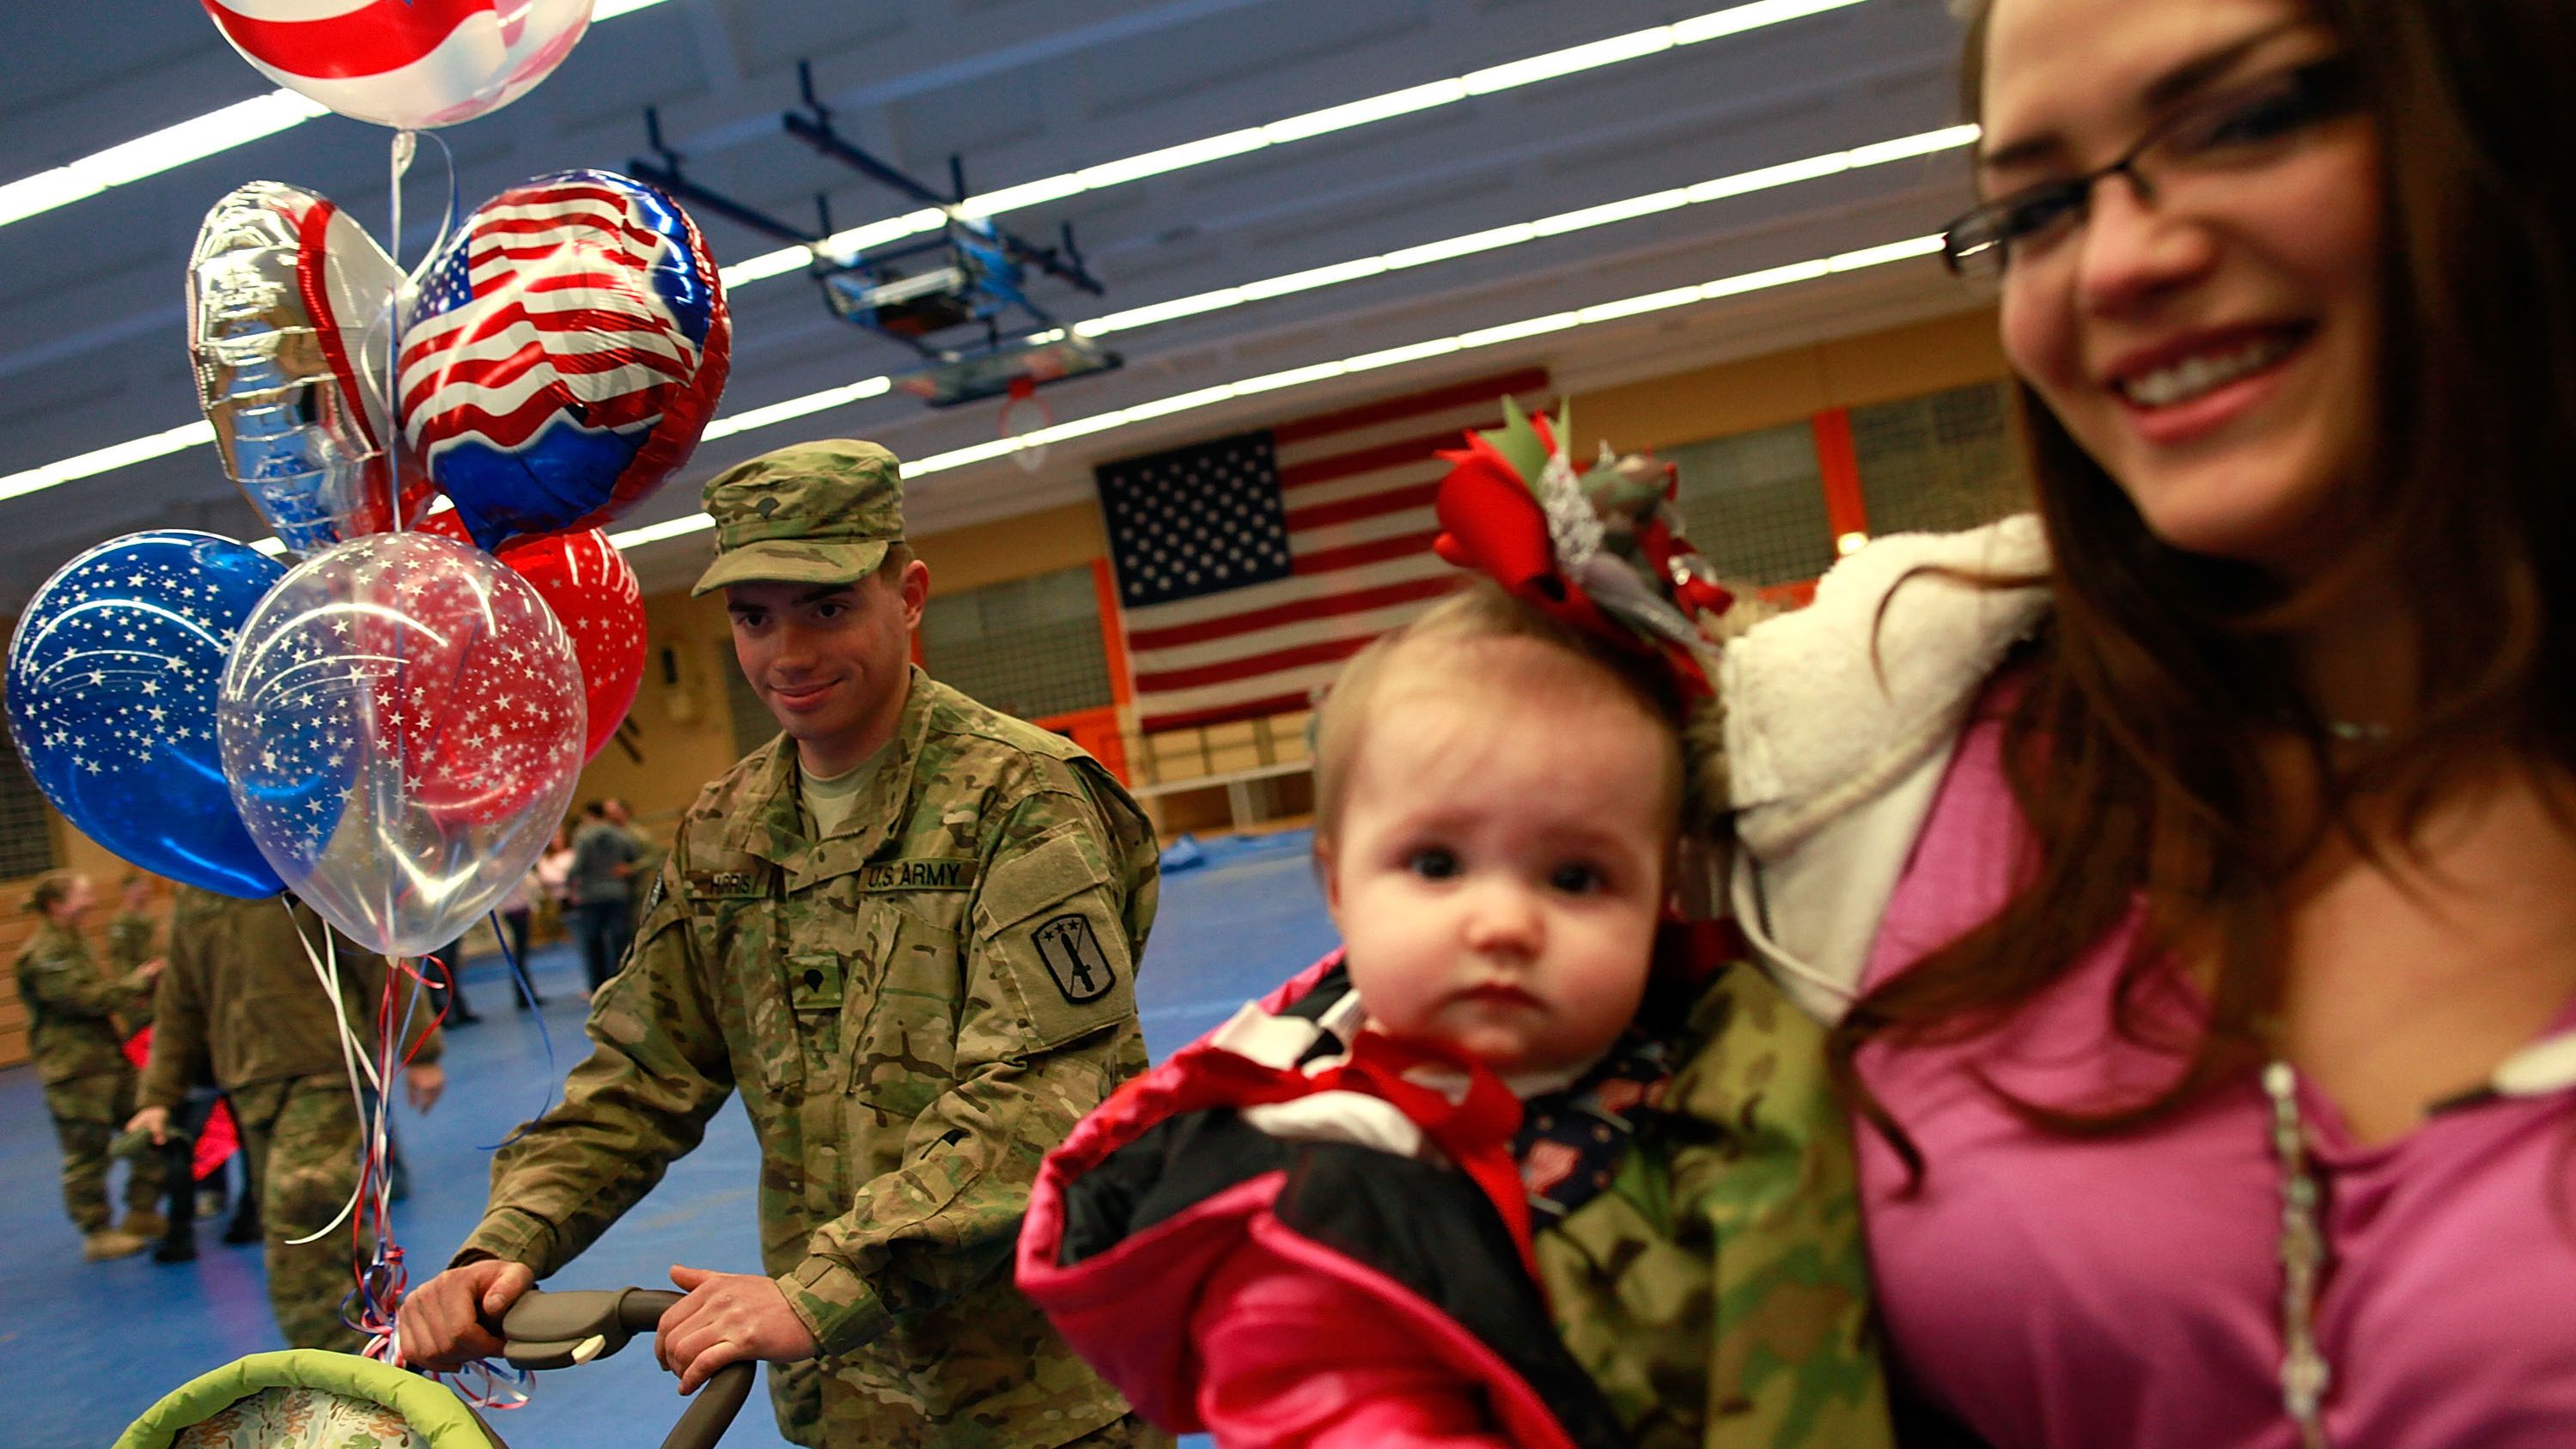 A soldier of the 170th U.S. Army Infantry Brigade, returned from Afghanistan, reunites in Germany with his family.